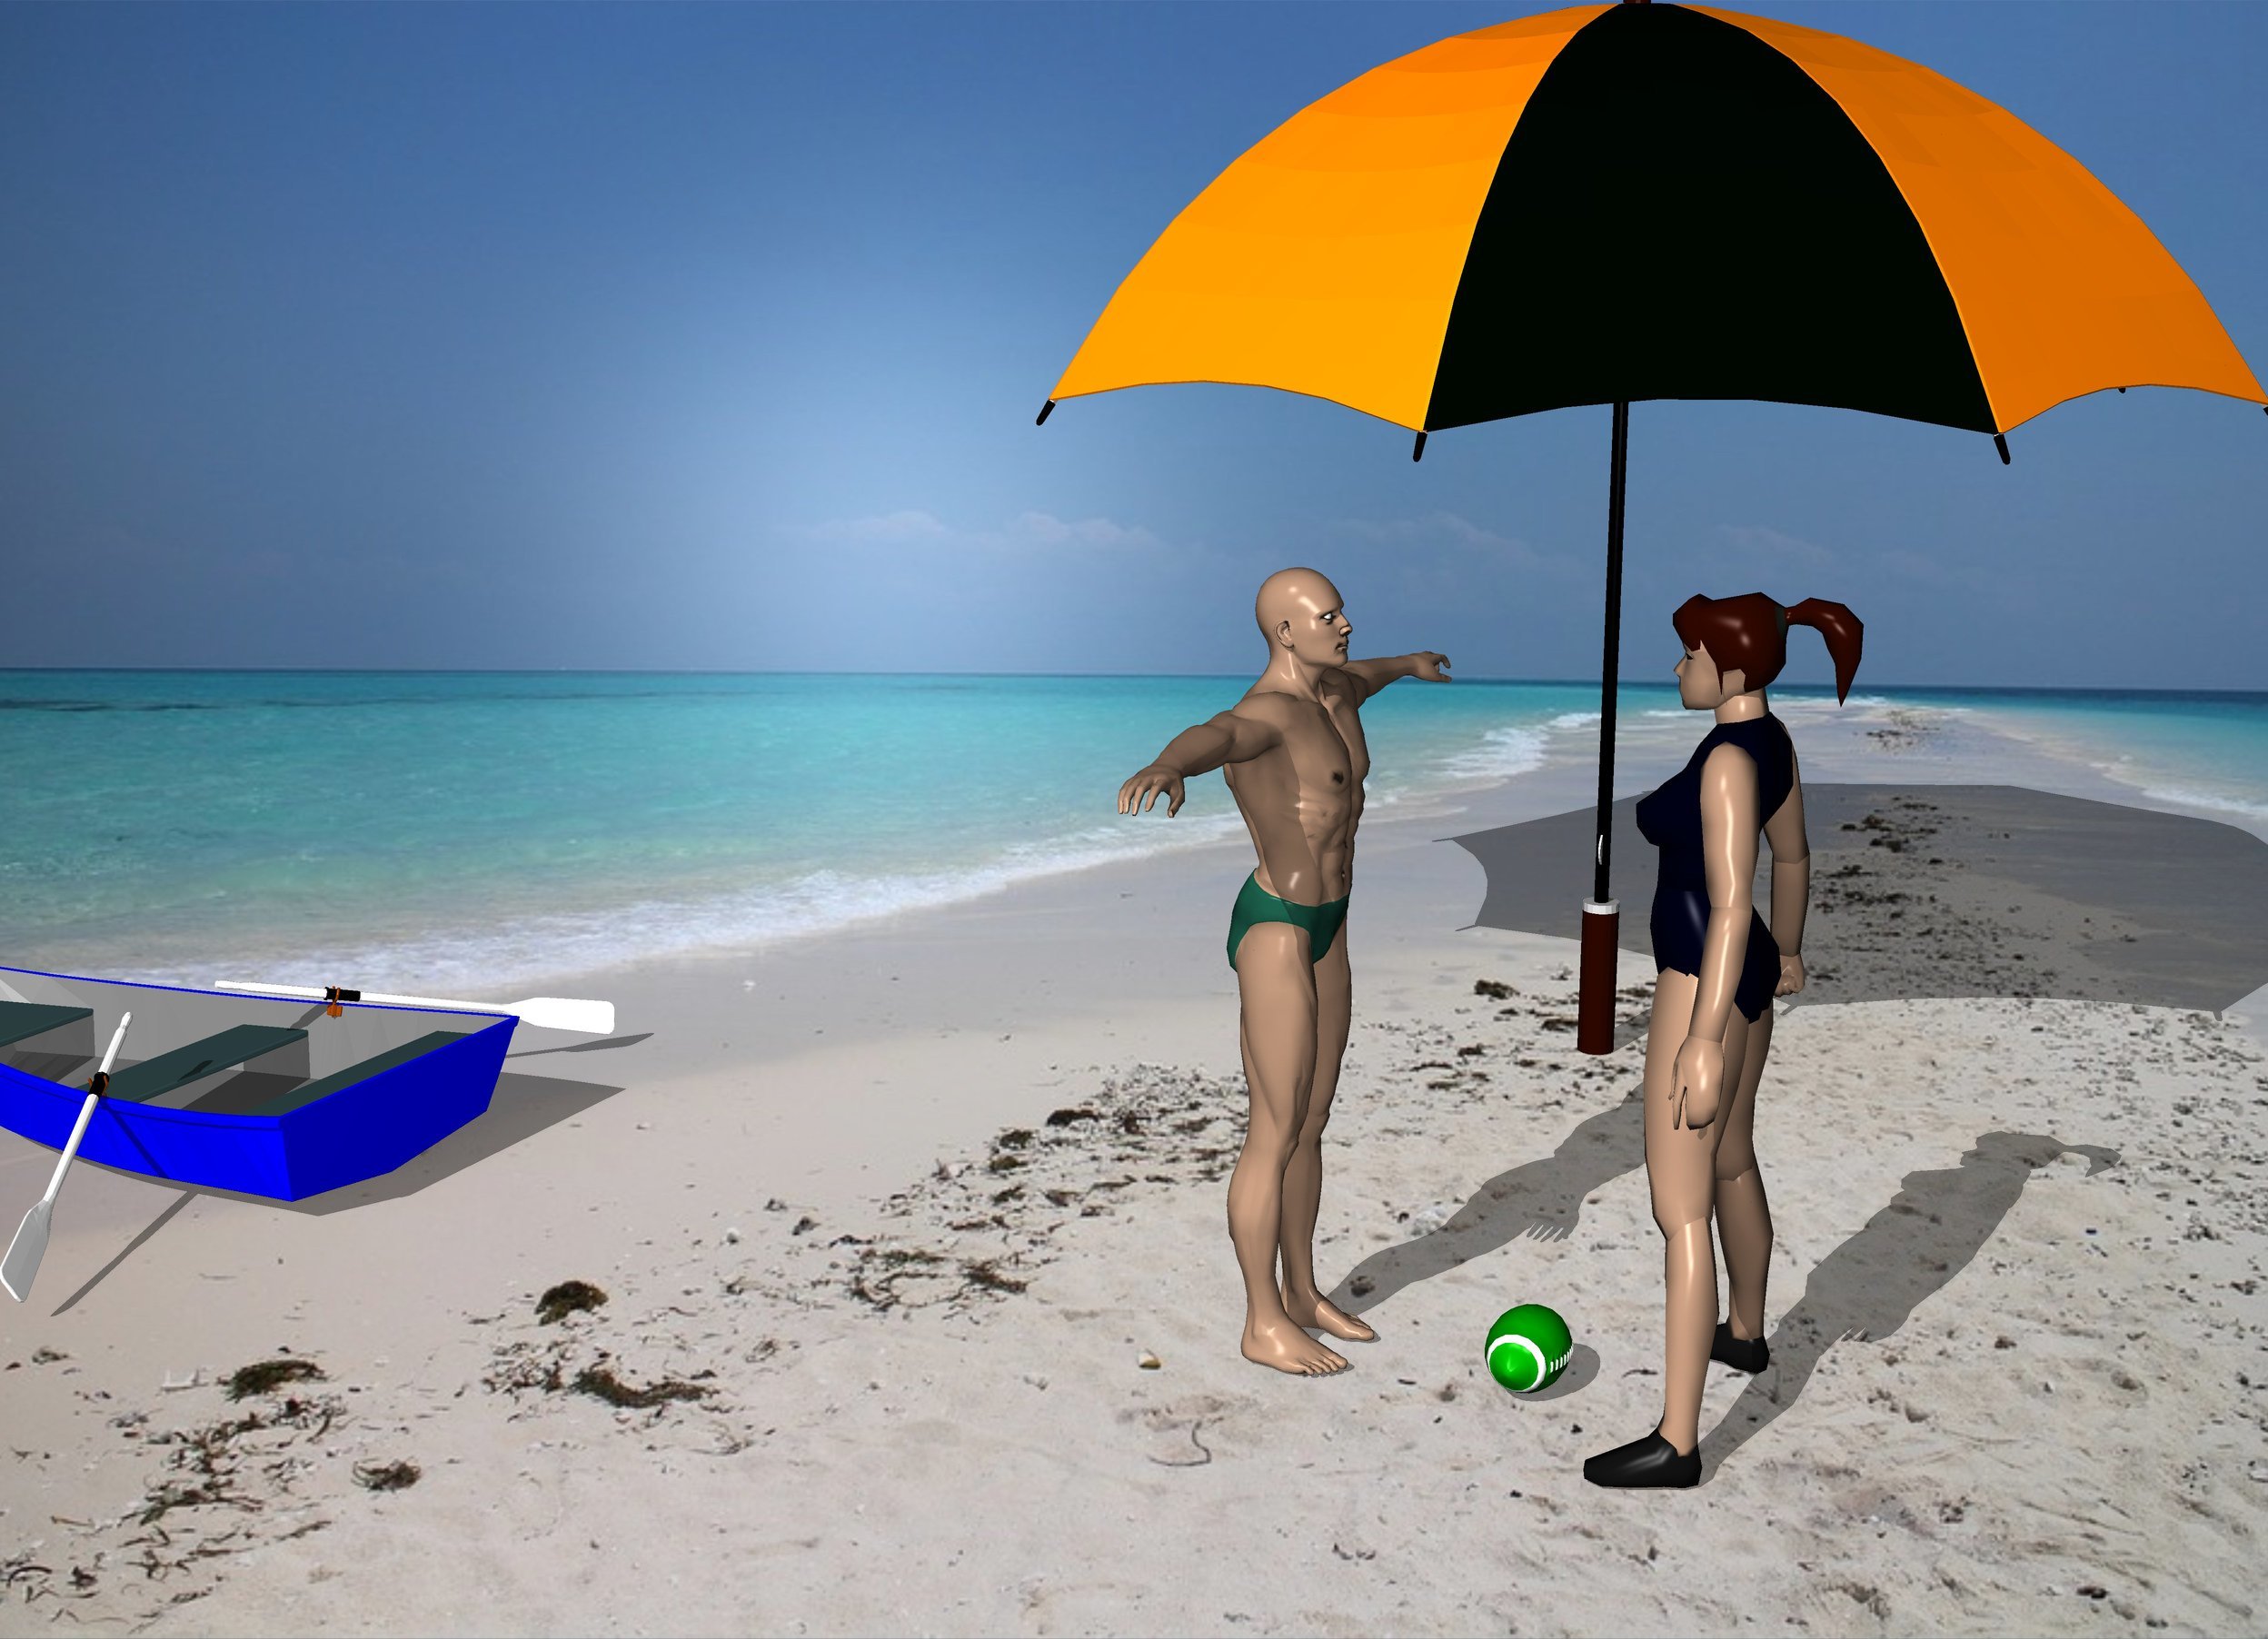 Input text: A man is 5  feet next to a very big umbrella. 2 feet in front of the man is a woman. The woman is facing the man. 1 feet in front of the man is a green ball. a rowboat is 8 feet behind the man. 